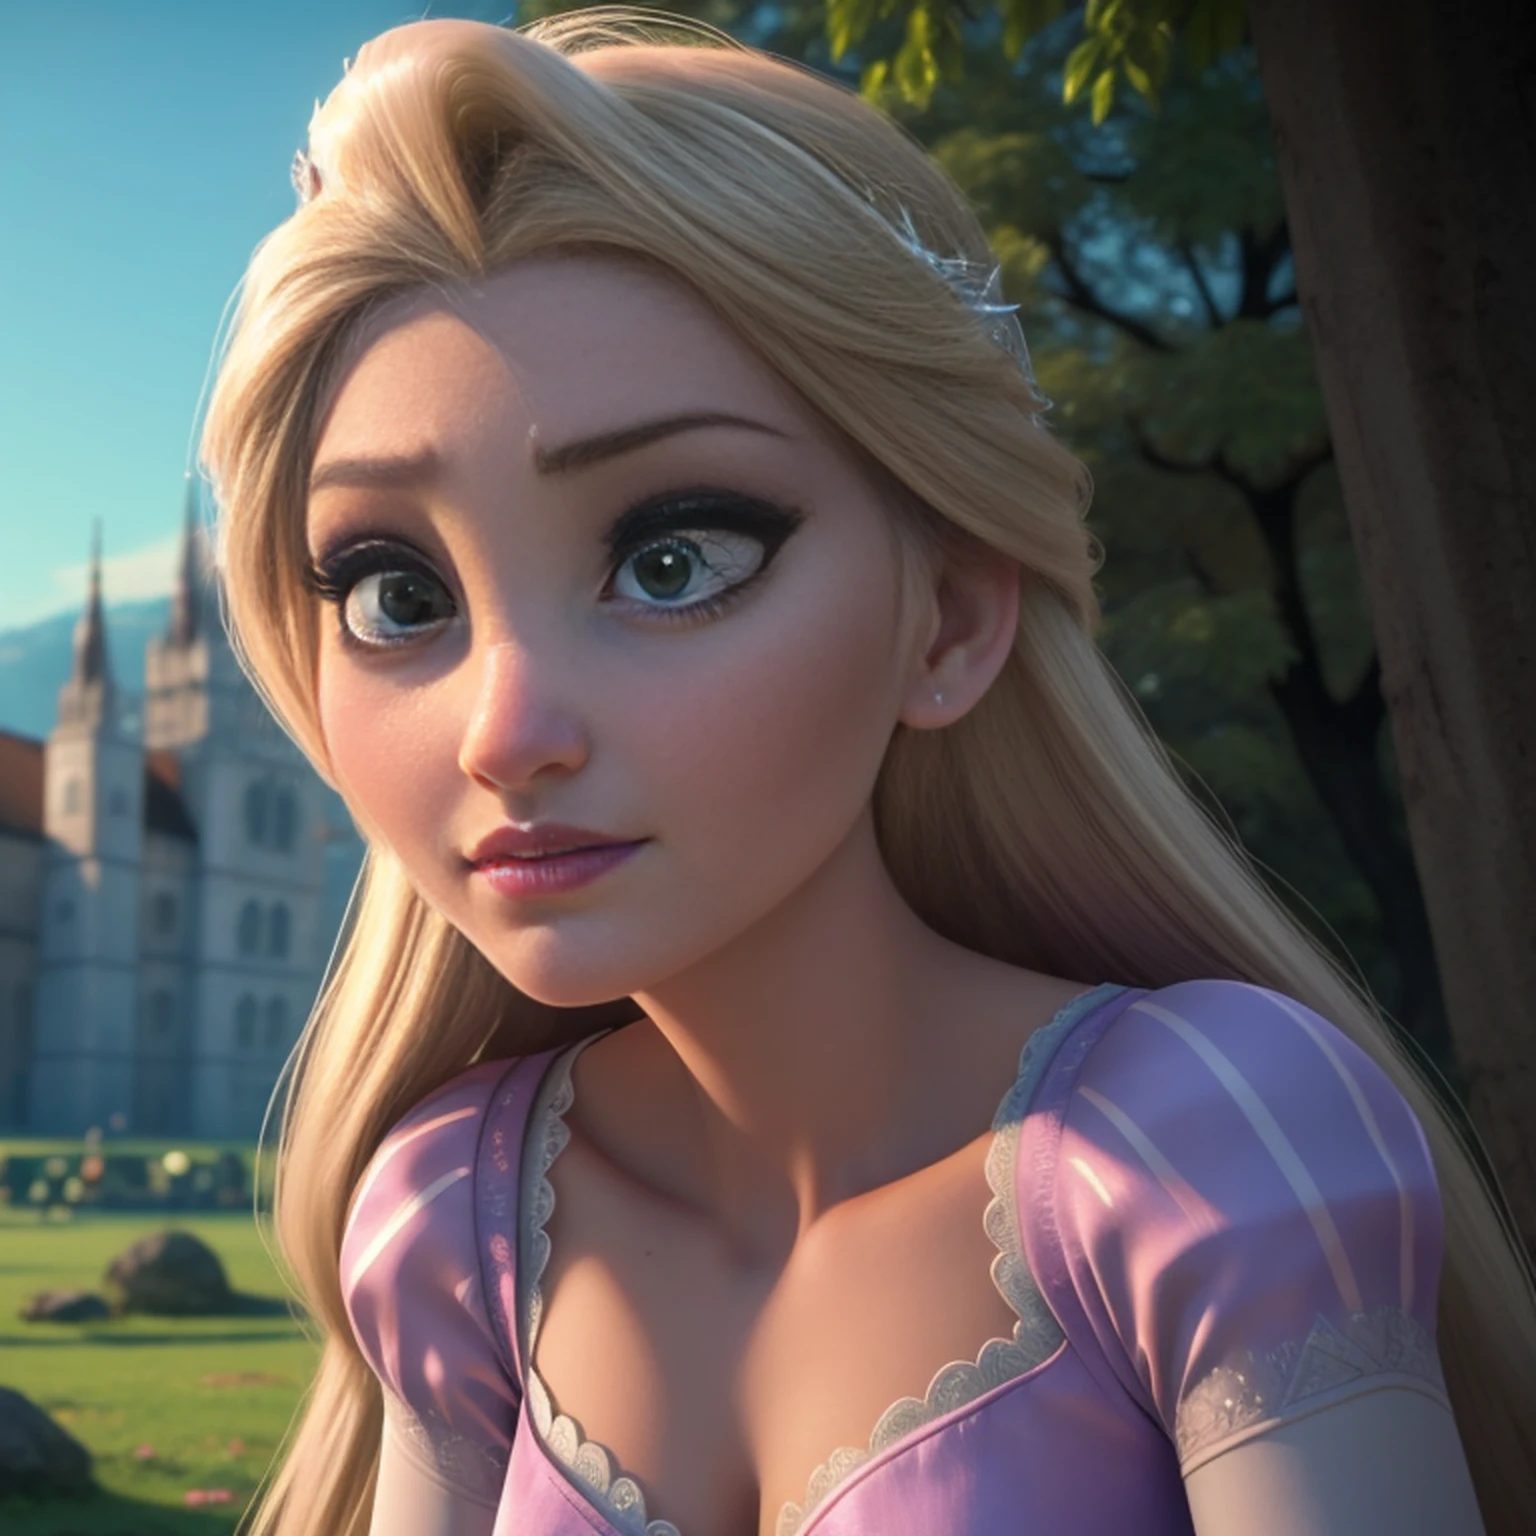 Elsa-Rapunzel Fusion, Merging models, Rapunzel&#39;s clothes, melting, 1girl, Beautiful, character, Woman, female, (master part:1.2), (best qualityer:1.2), (standing alone:1.2), ((struggling pose)), ((field of battle)), cinemactic, perfects eyes, perfect  skin, perfect lighting, sorrido, Lumiere, Farbe, texturized skin, detail, Beauthfull, wonder wonder wonder wonder wonder wonder wonder wonder wonder wonder wonder wonder wonder wonder wonder wonder wonder wonder wonder wonder wonder wonder wonder wonder wonder wonder wonder wonder wonder wonder wonder wonder, ultra detali, face perfect